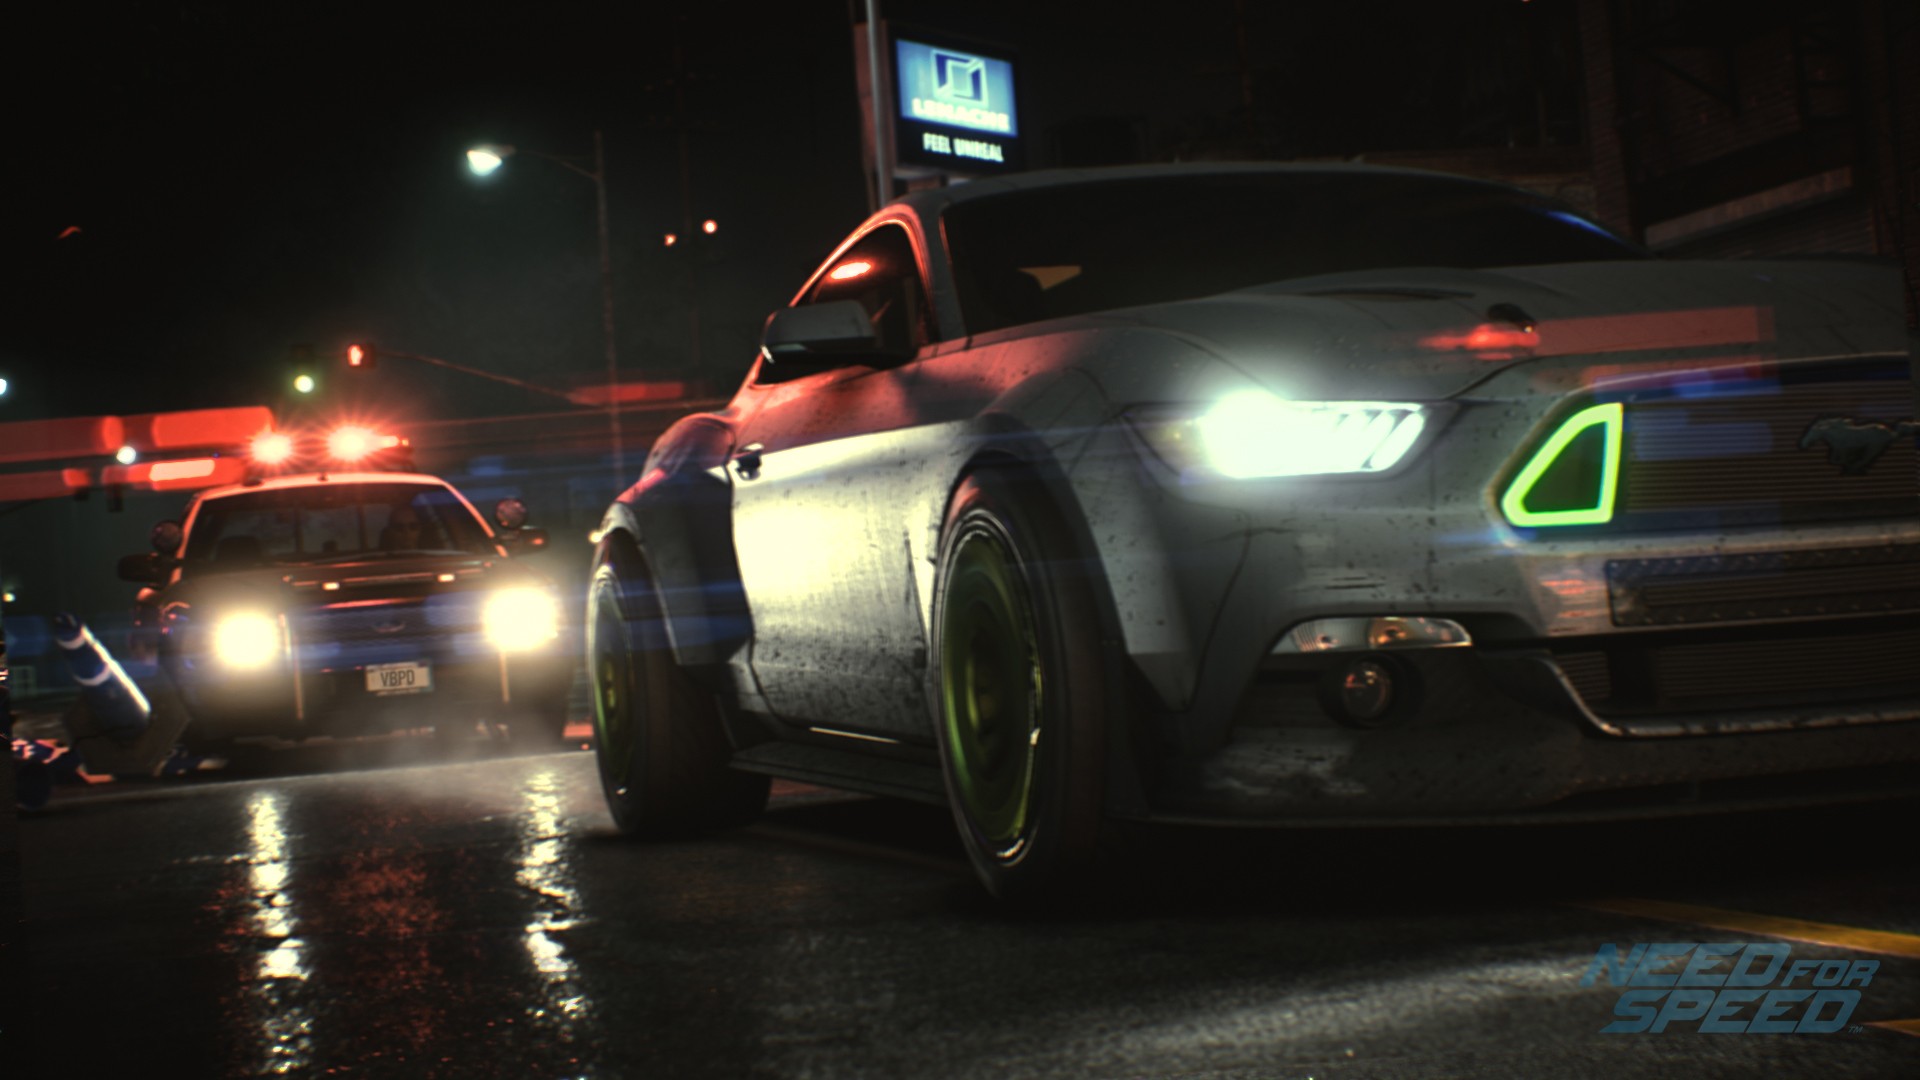 Need For Speed 2015 Video Games Car 2015 Ford Mustang Rtr Images, Photos, Reviews